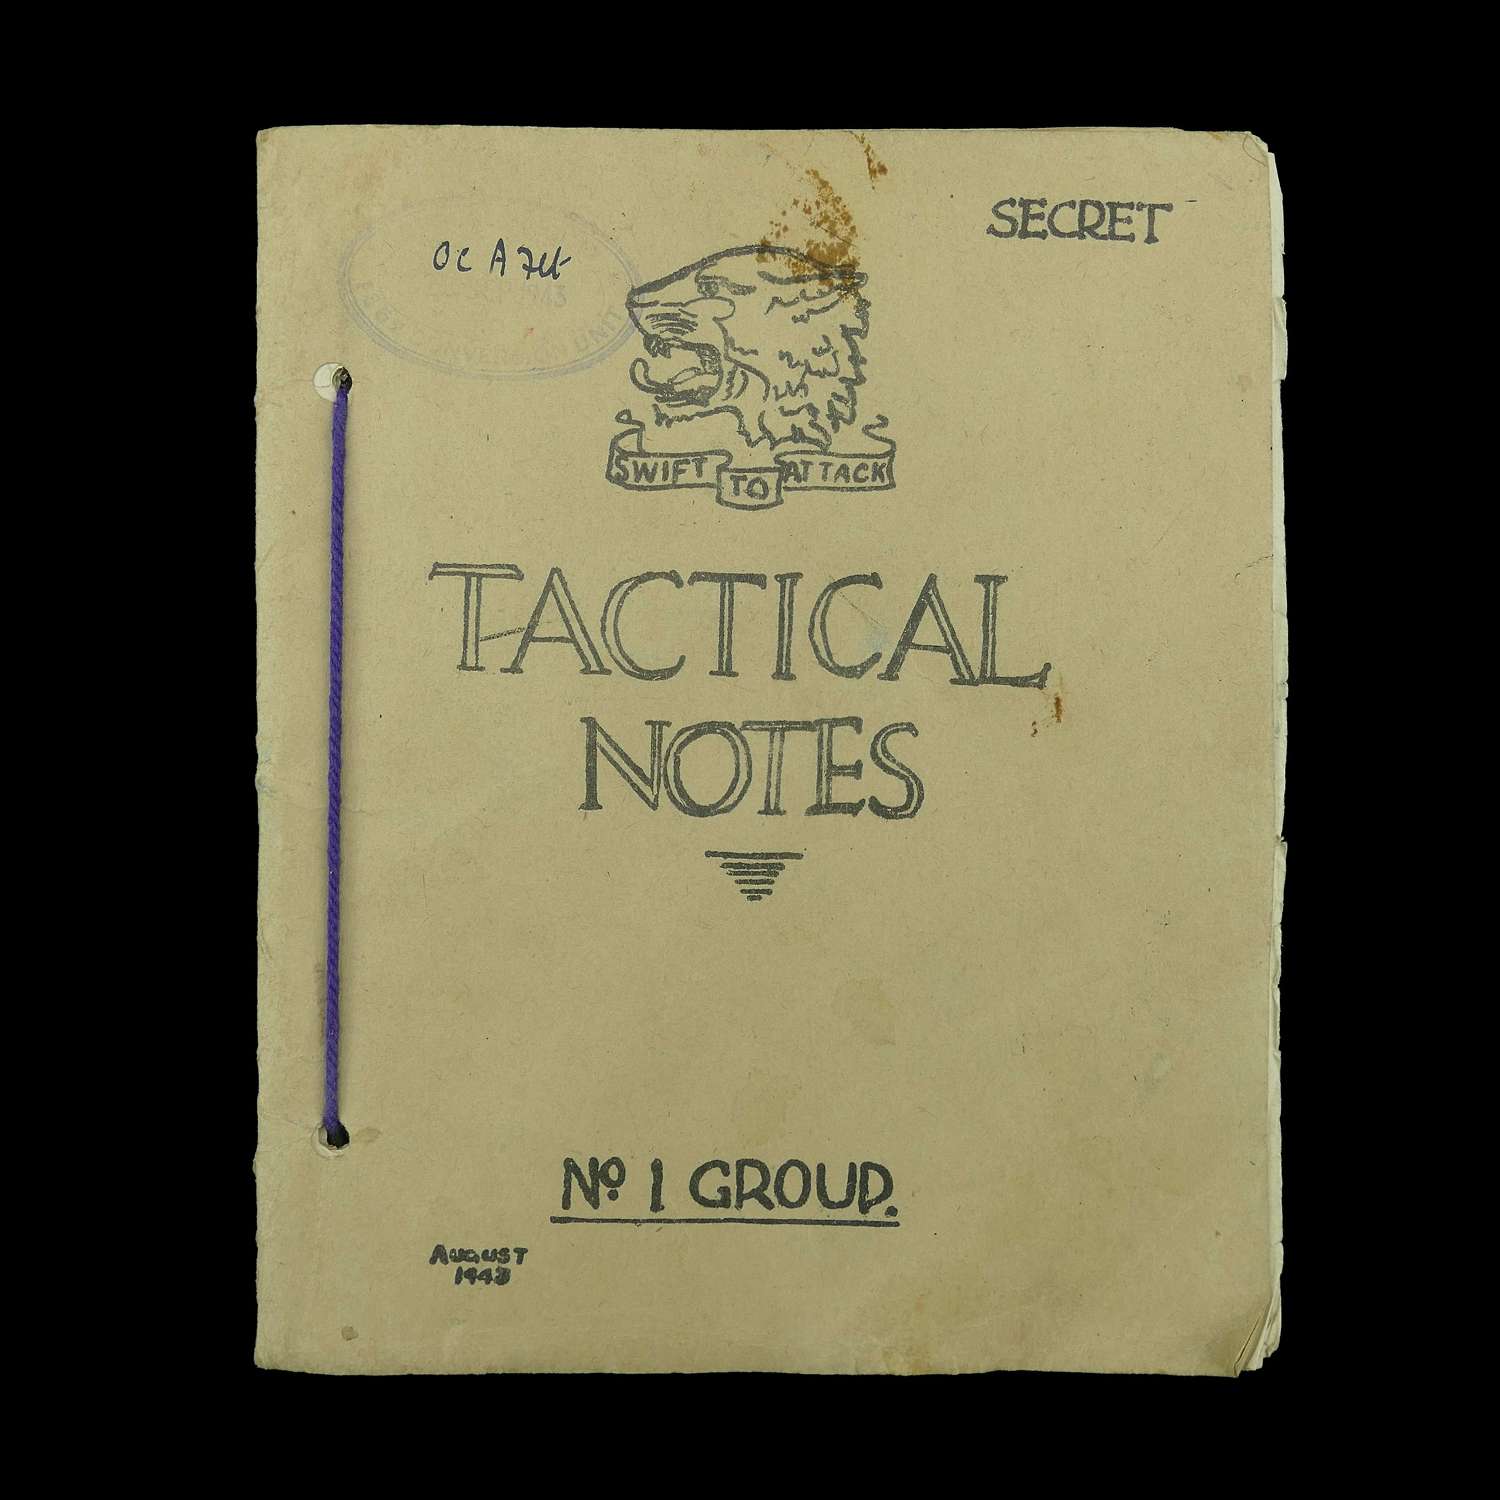 RAF Bomber Command Tactical Notes, 1 Group, 1943